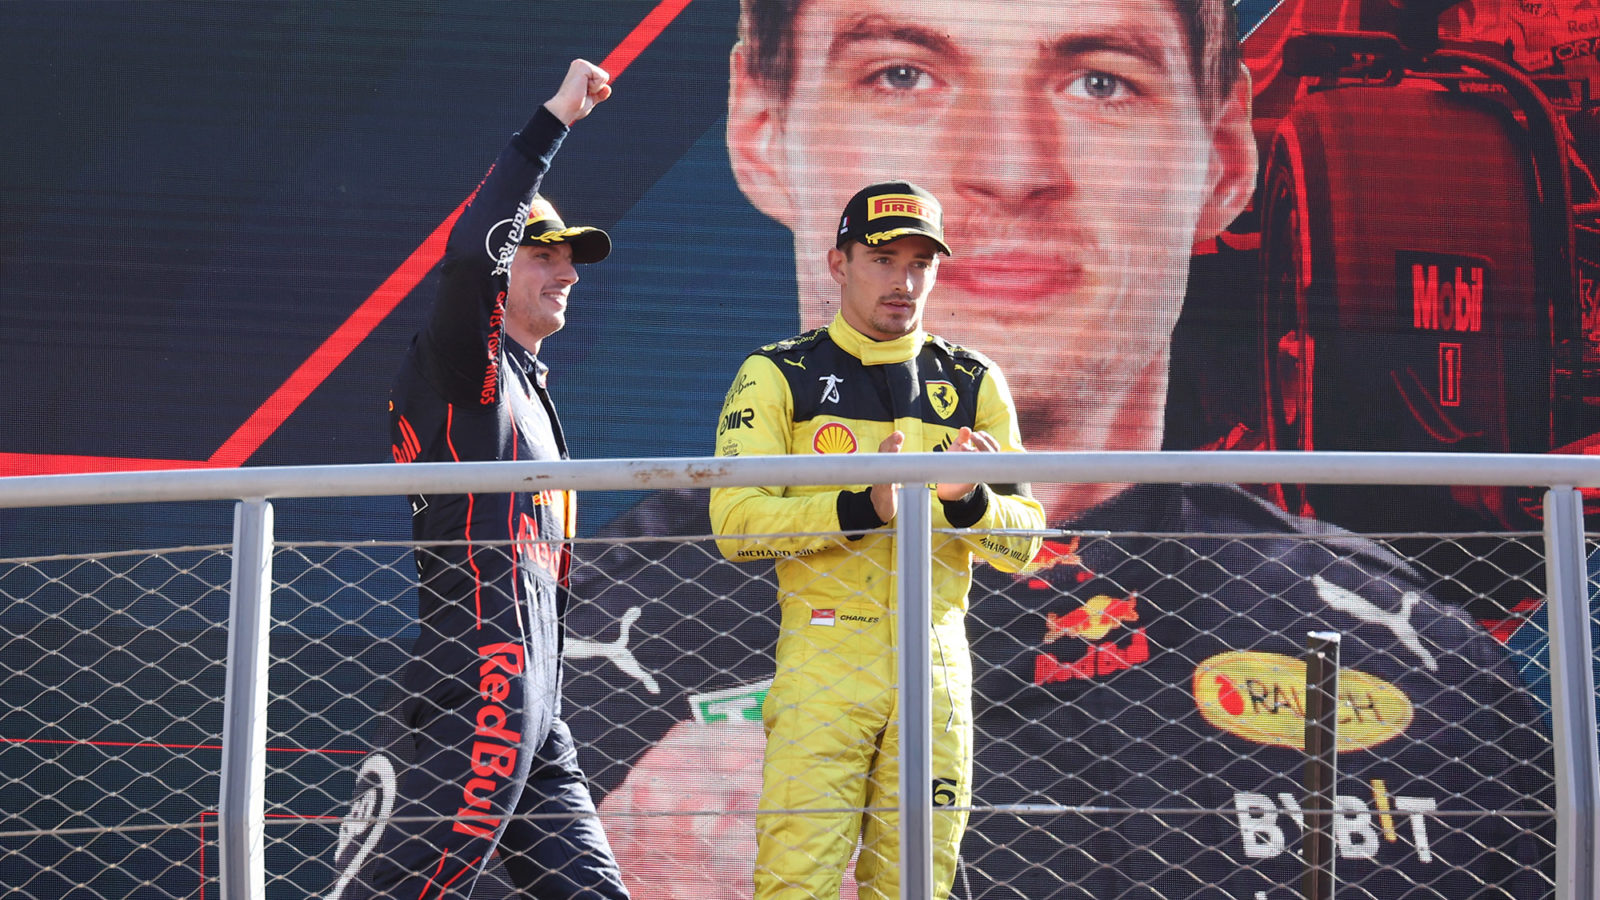 Charles Leclerc applauds as Max Verstappen holds his arm up on the podium after winning the 2022 Italian Grand Prix